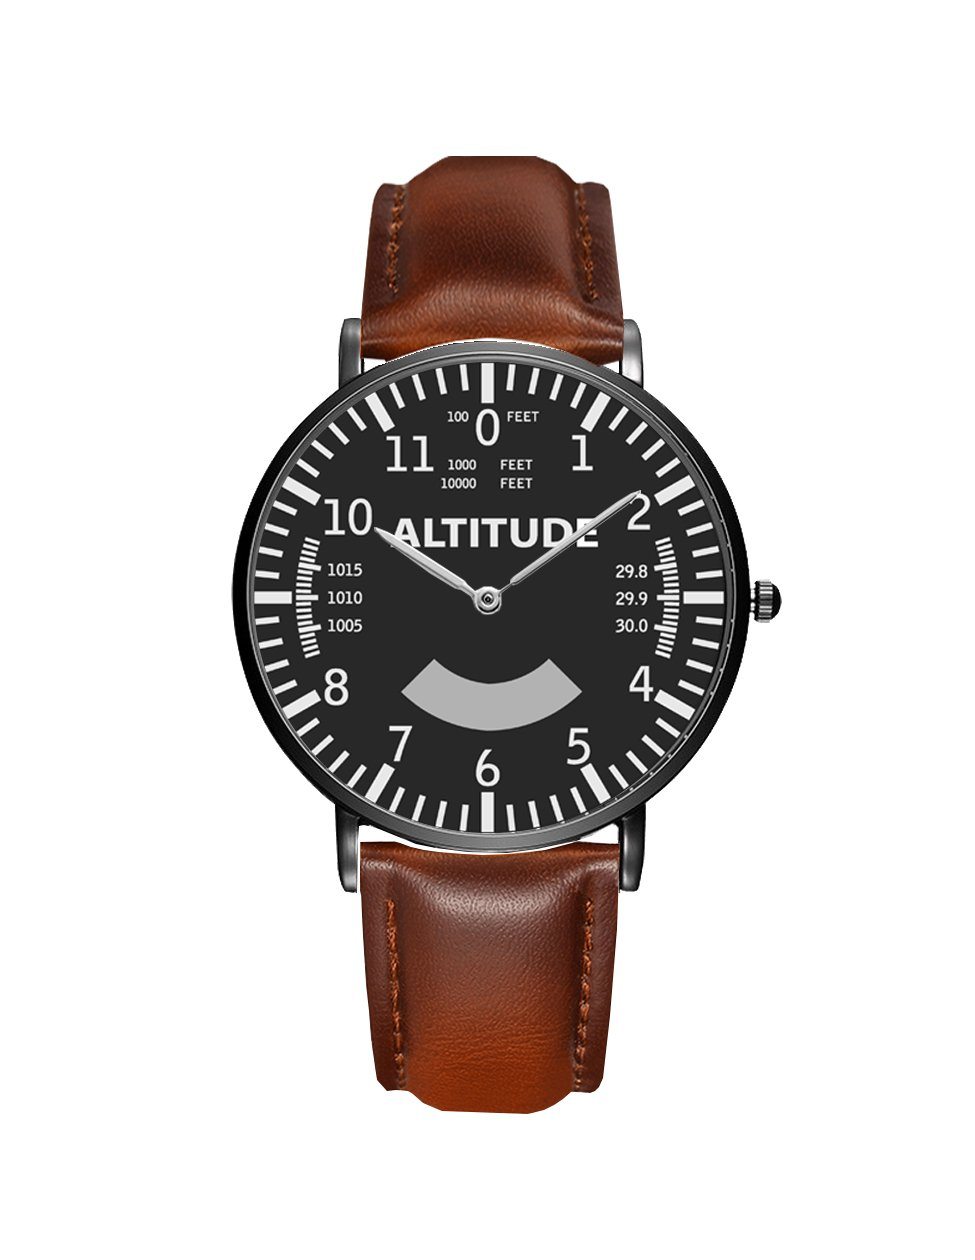 Airplane Instrument Series (Altitude) Leather Strap Watches Pilot Eyes Store Black & Black Leather Strap 